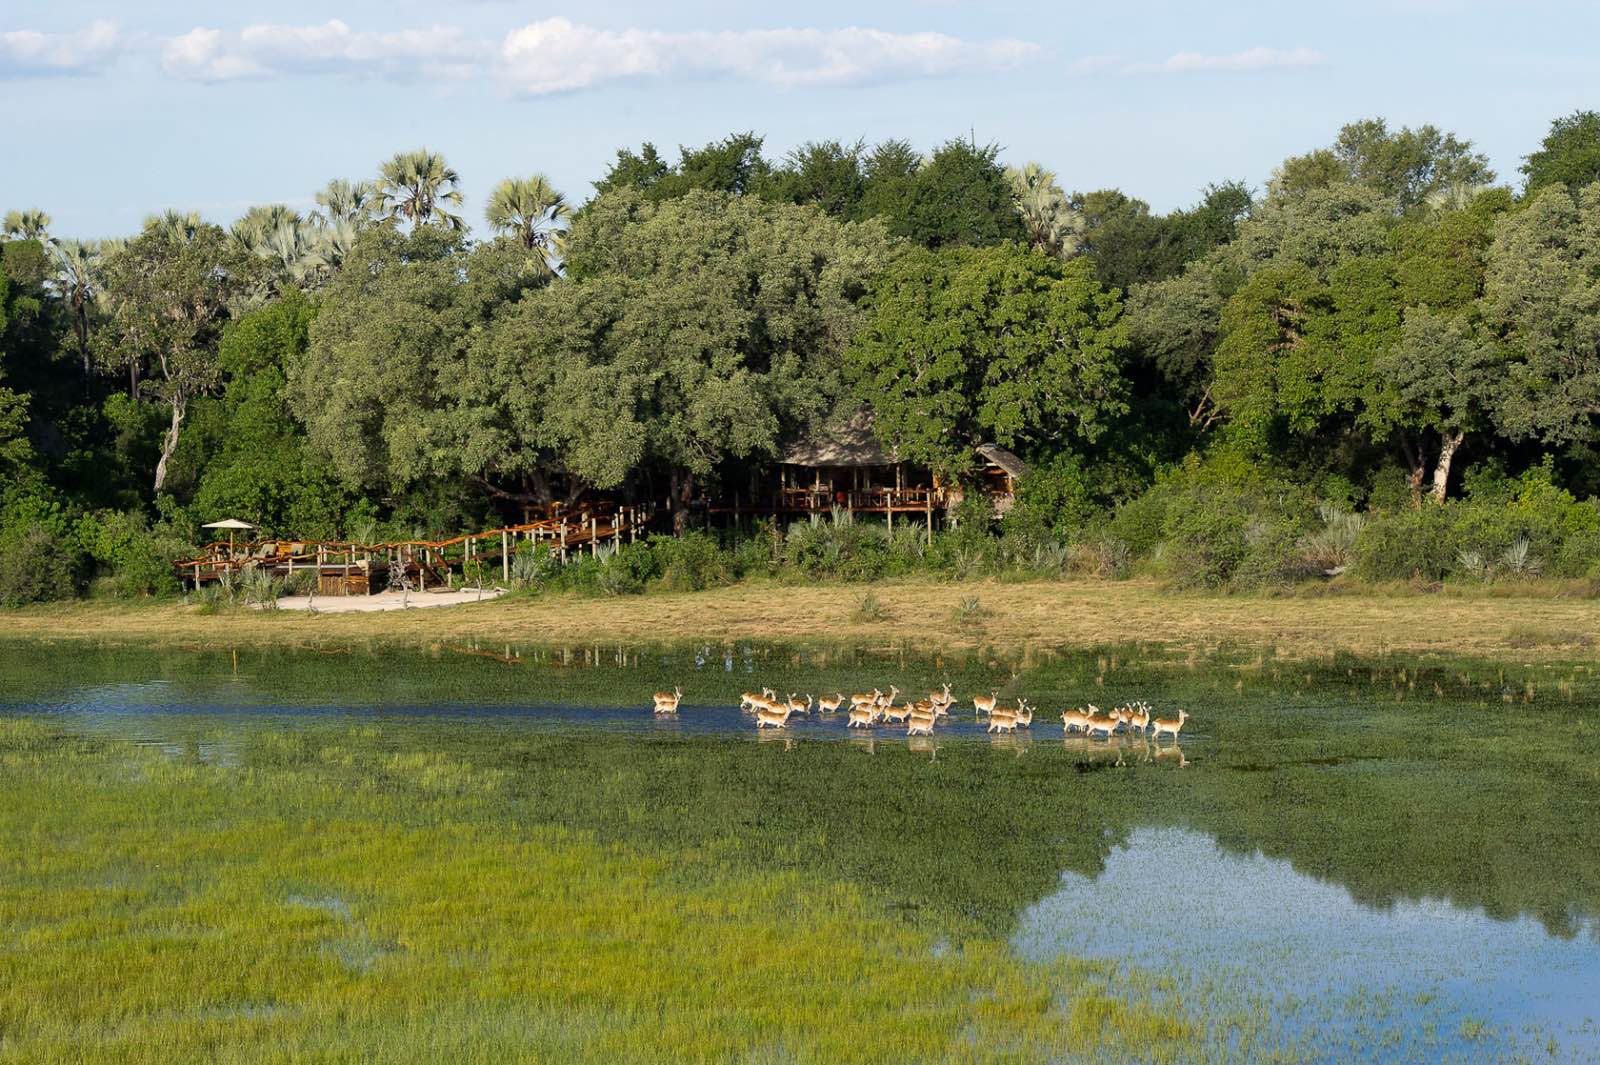 Idyllic location in the trees of Hundu Island in the Delta at Tubu Tree Camp with lechwe in the foreground